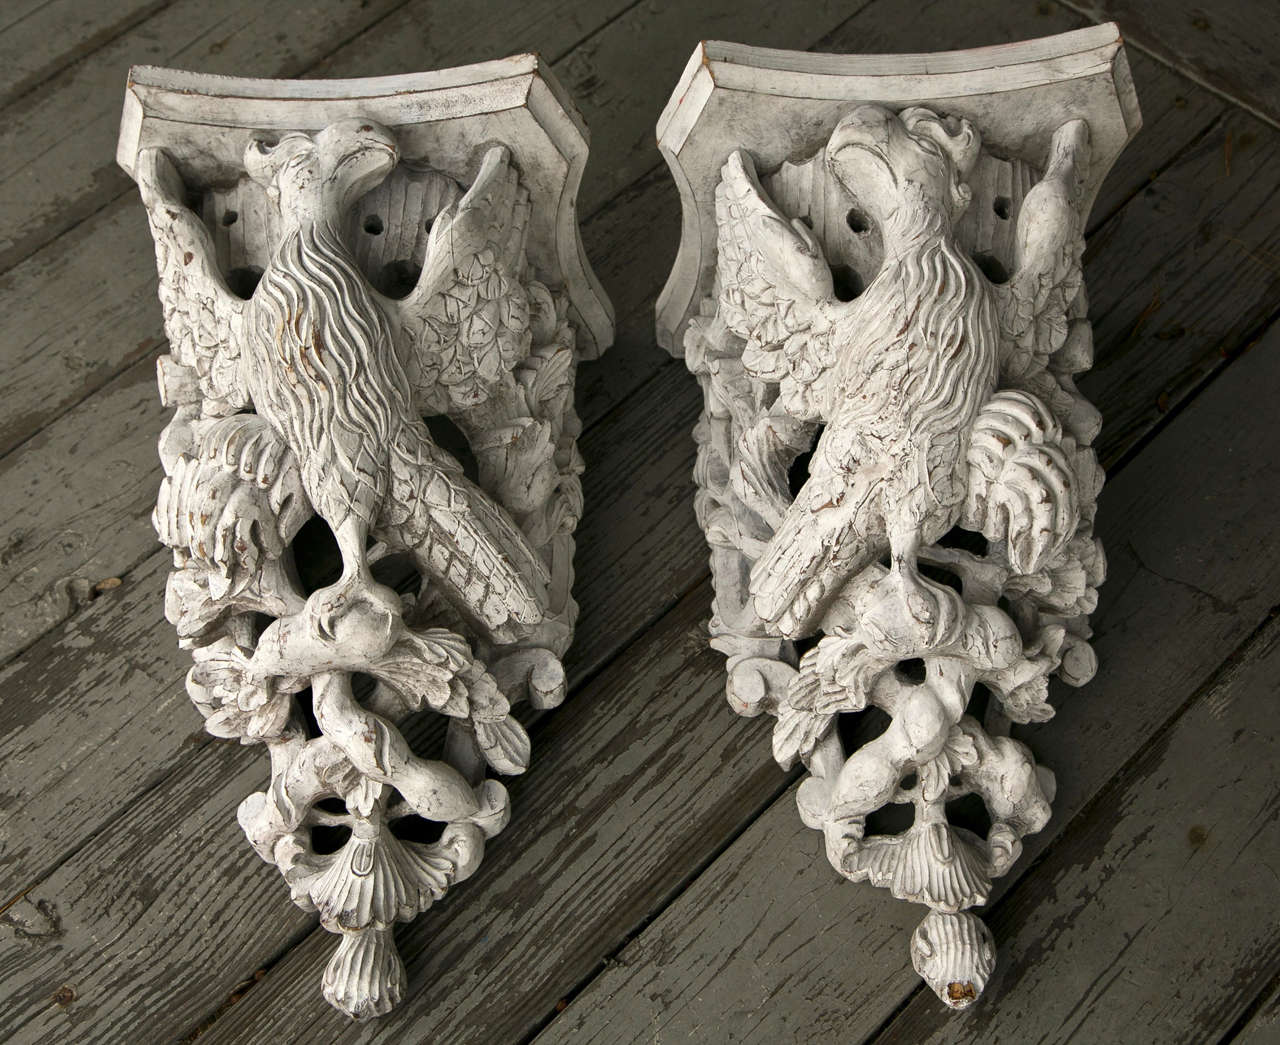 A true pair of brackets with one  eagle(?) facing left, the other facing to the right.  Out spread  wings help hold up the concave sided shelf.  The birds set among branches and foliates. A single coat of worn white paint covers the brackets. The